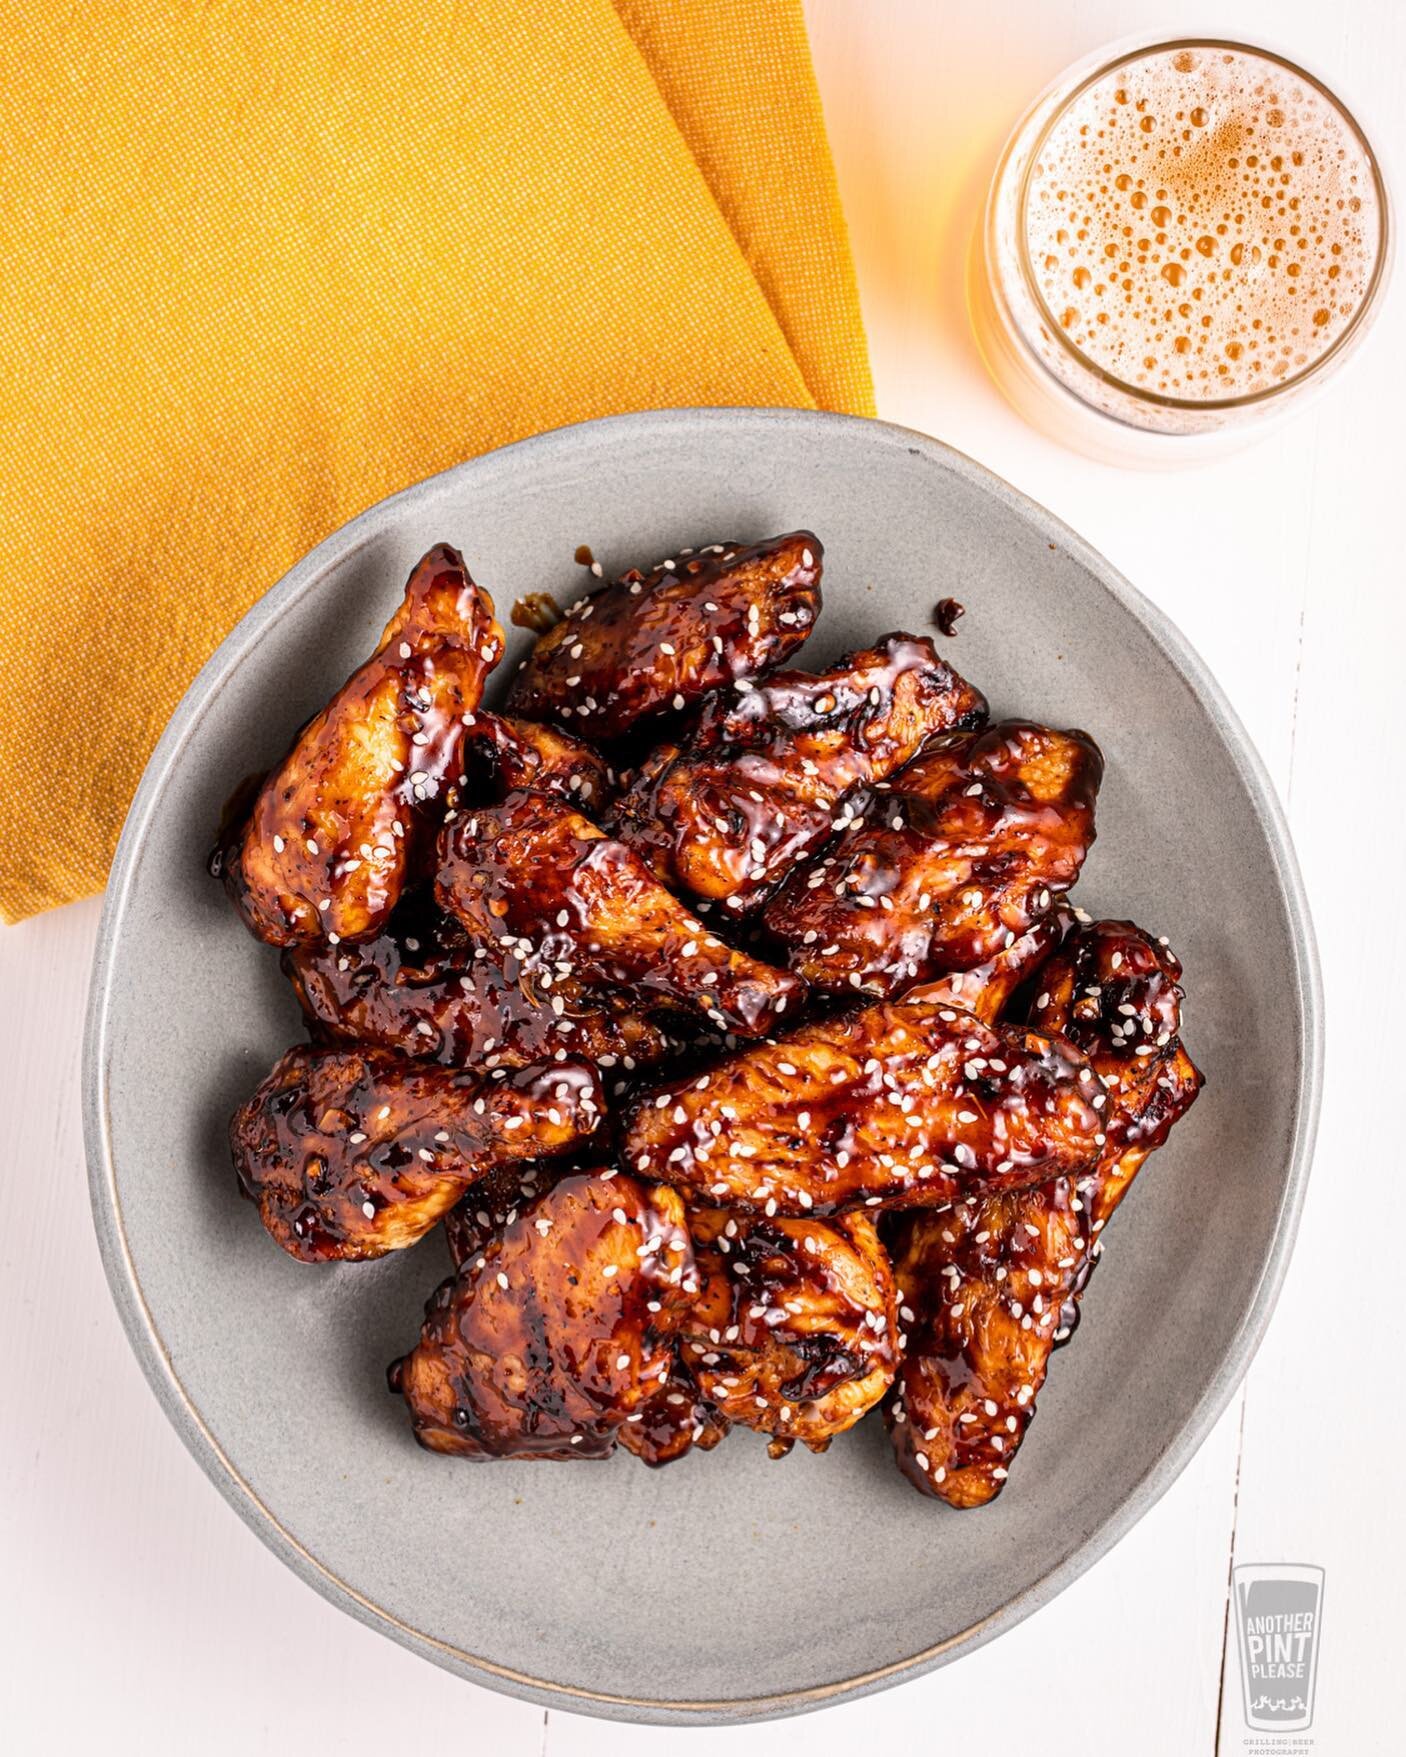 General Tso is not just for carryout! At least not when we are talking General Tso&rsquo;s chicken wings! I&rsquo;ve had this idea floating around for awhile and while I just grabbed a random sauce recipe off the interwebs, this begs culinary study. 